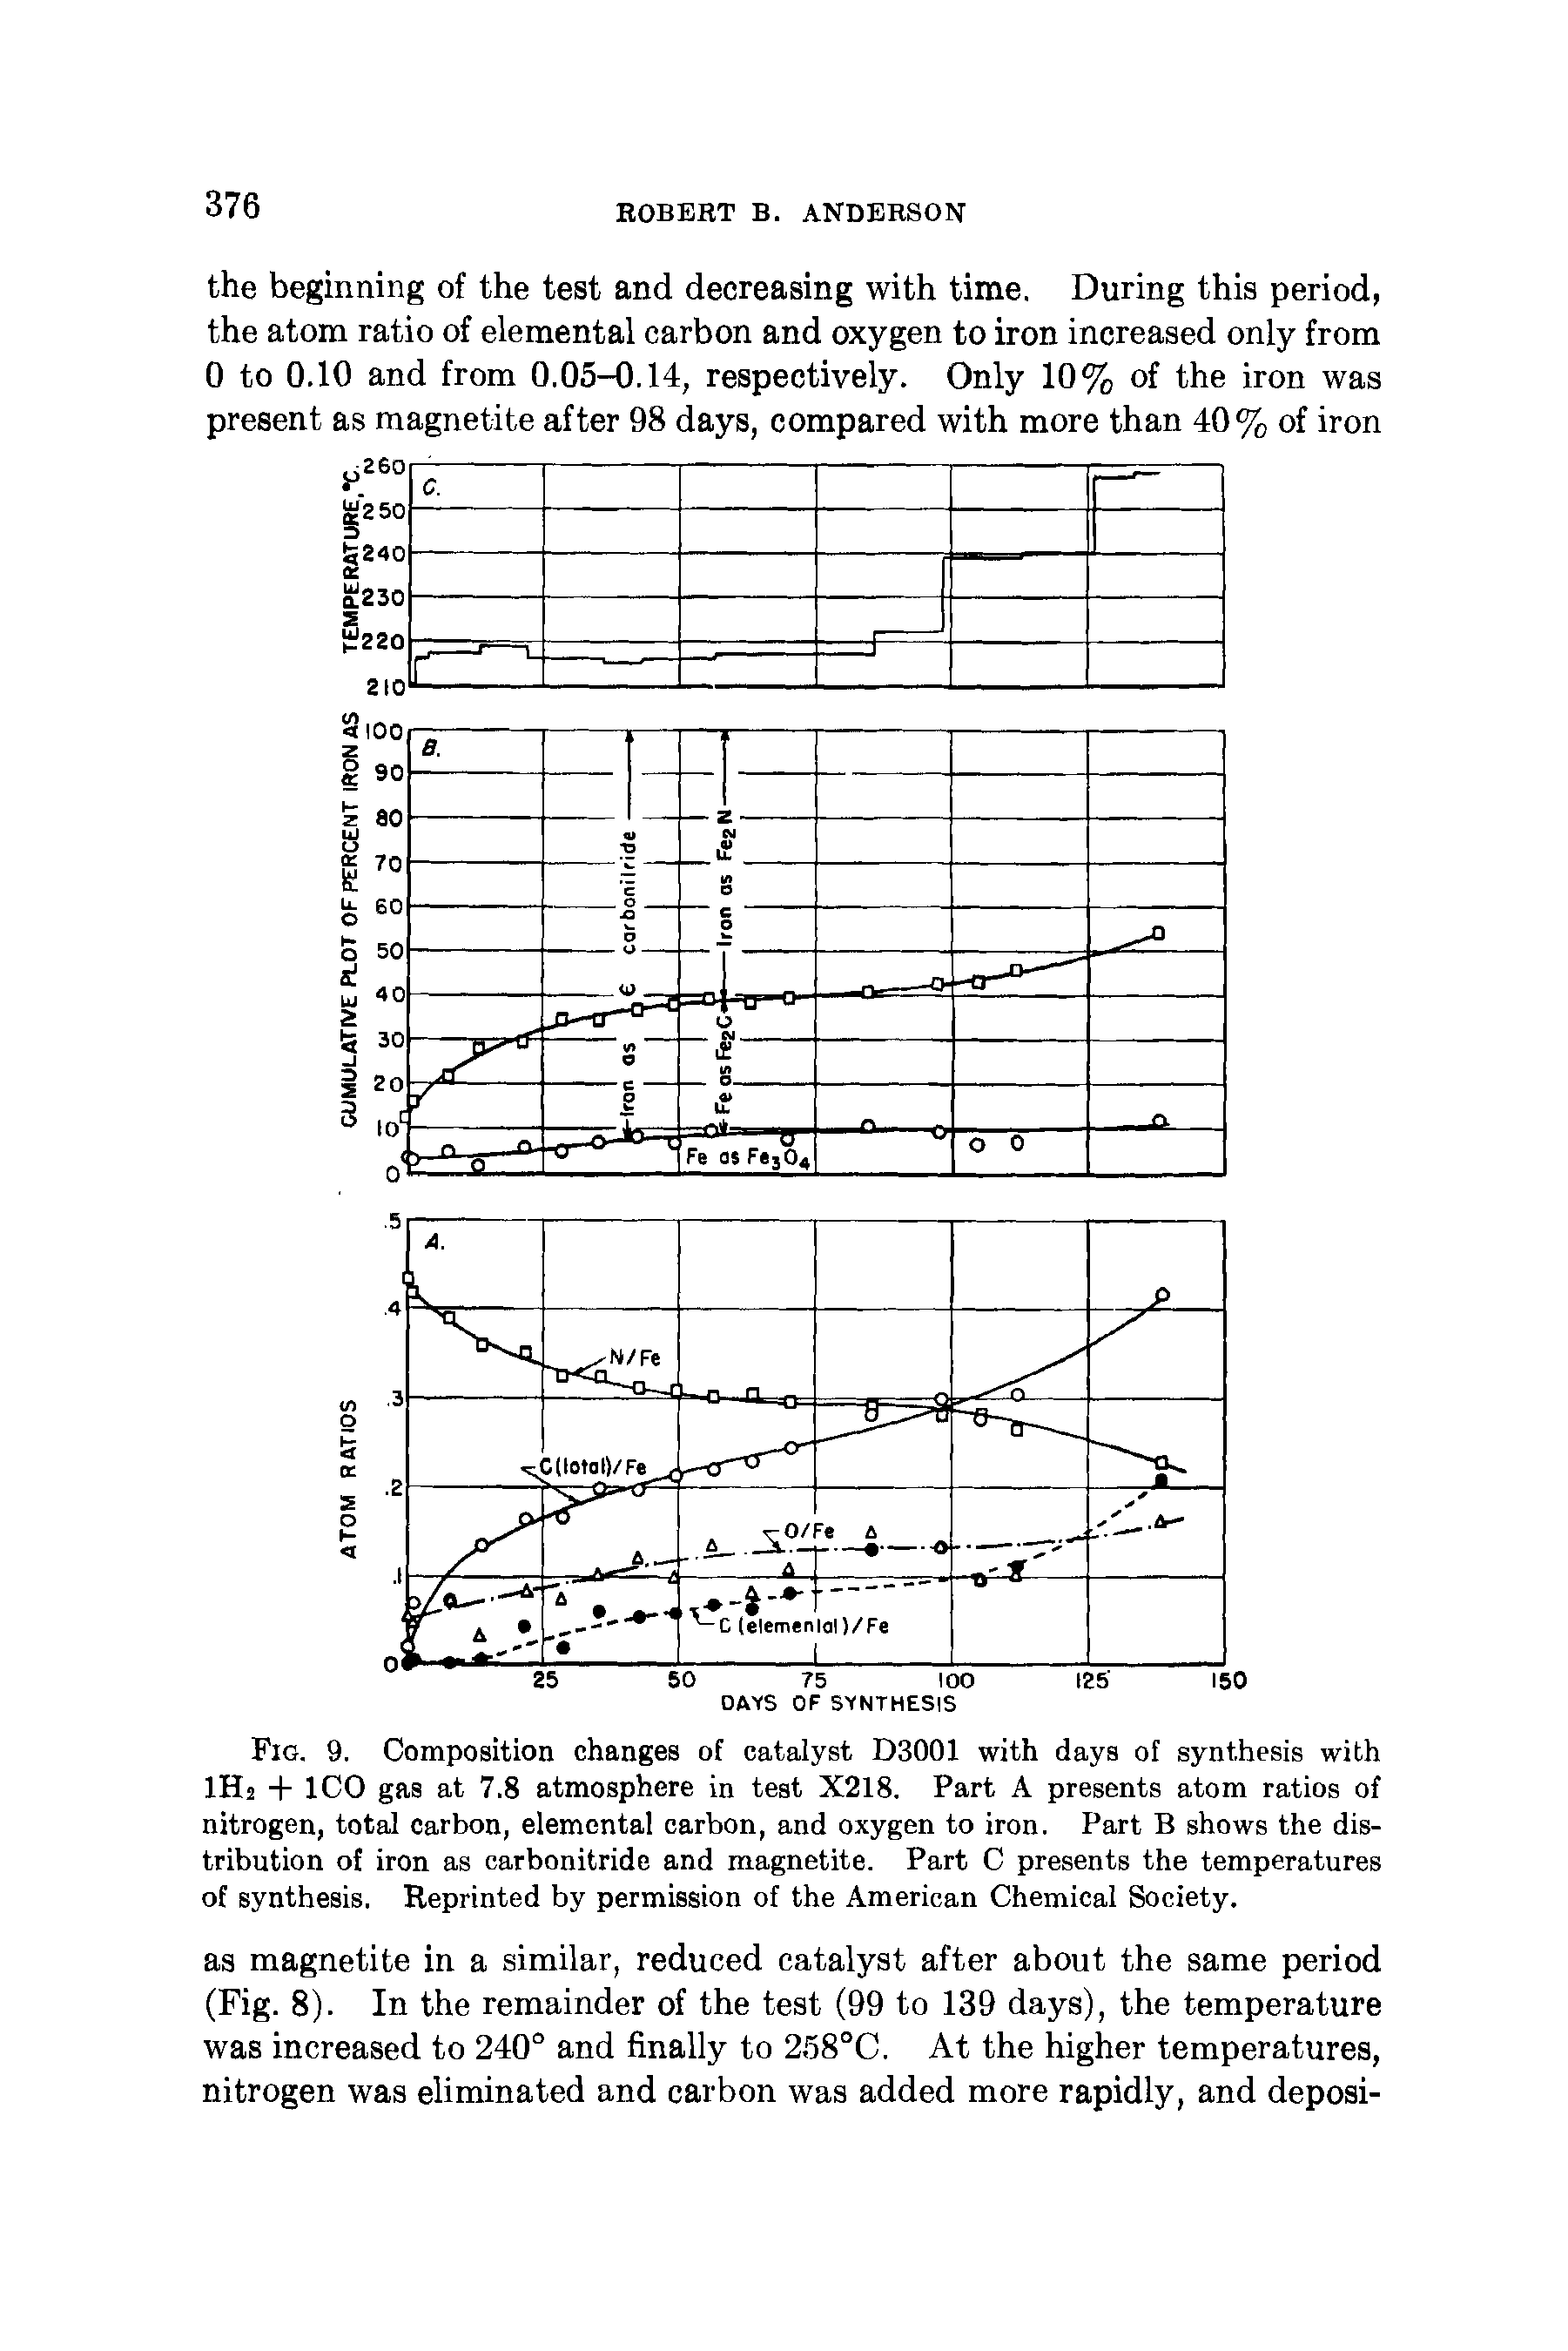 Fig. 9. Composition changes of catalyst D3001 with days of synthesis with IH2 + ICO gas at 7.8 atmosphere in test X218. Part A presents atom ratios of nitrogen, total carbon, elemental carbon, and oxygen to iron. Part B shows the distribution of iron as carbonitride and magnetite. Part C presents the temperatures of synthesis. Reprinted by permission of the American Chemical Society.